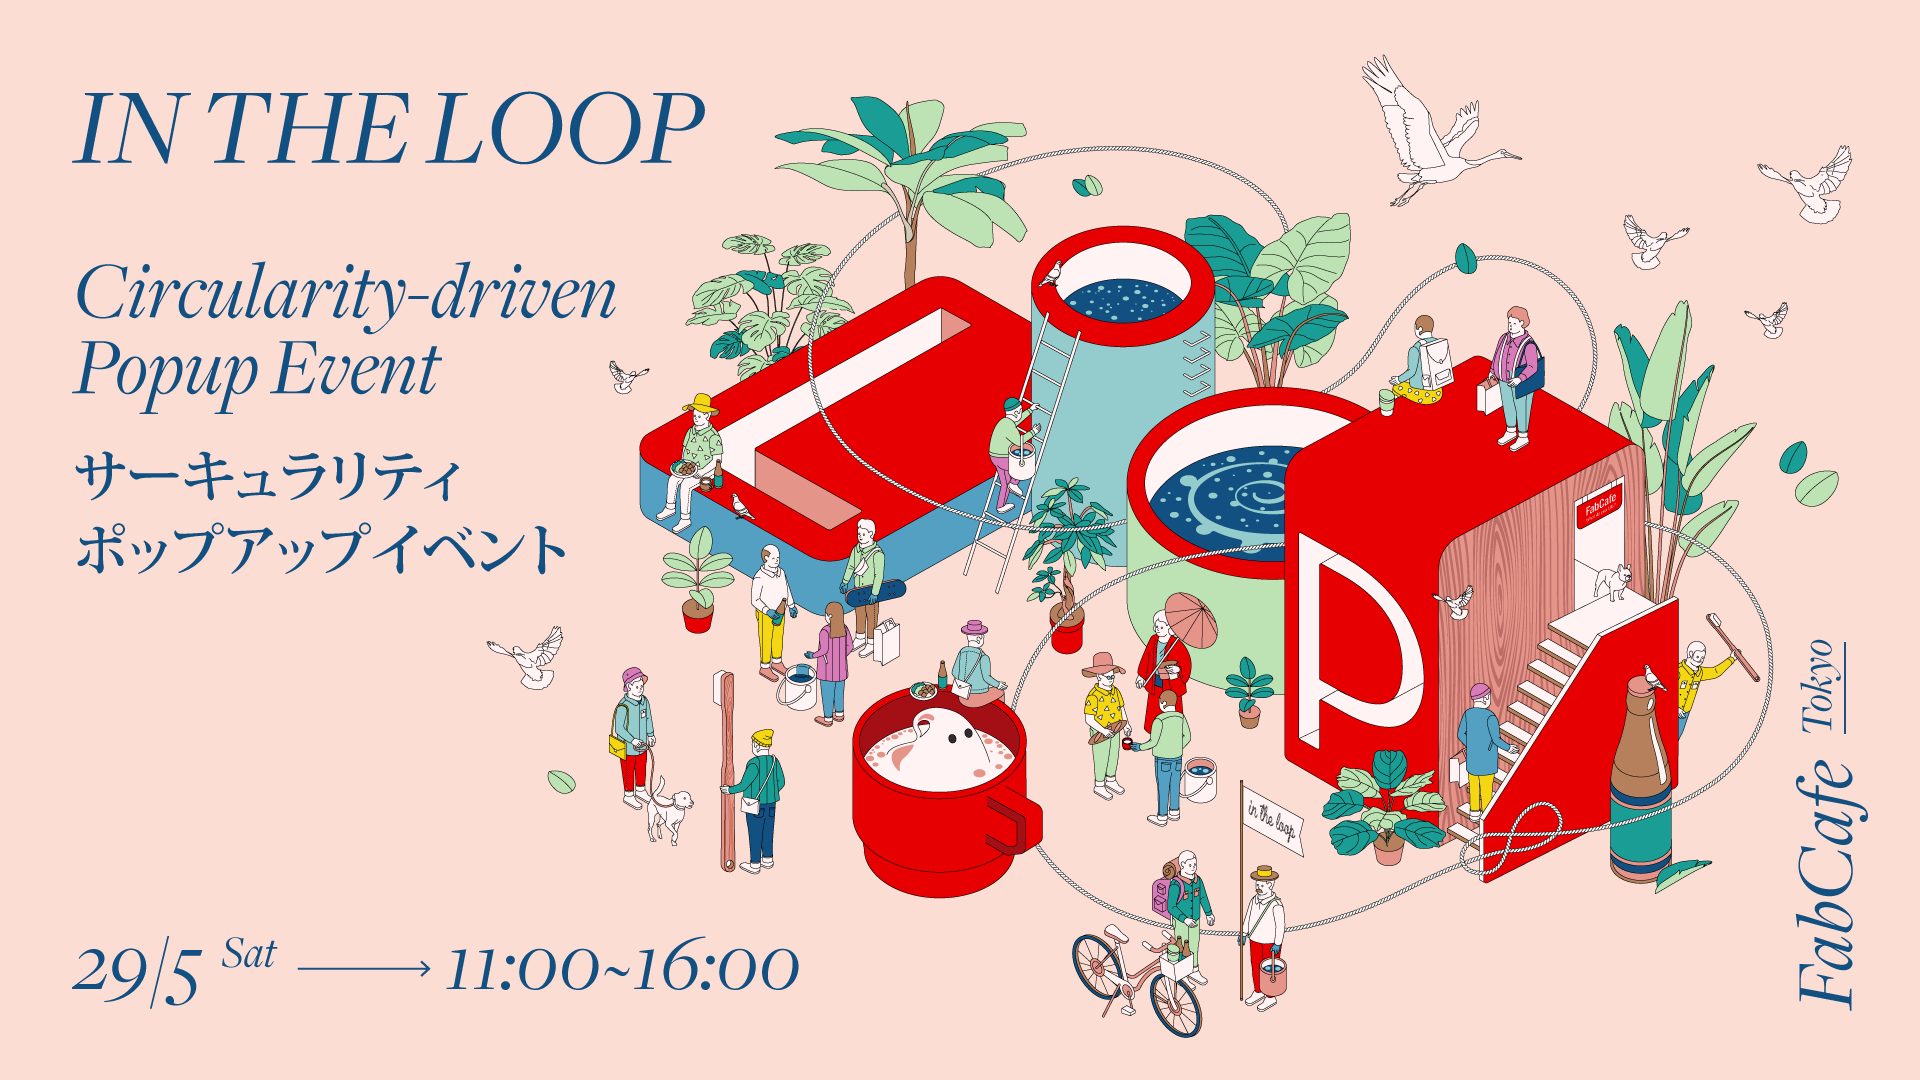 In the Loop – A Circularity-driven Popup Community Event